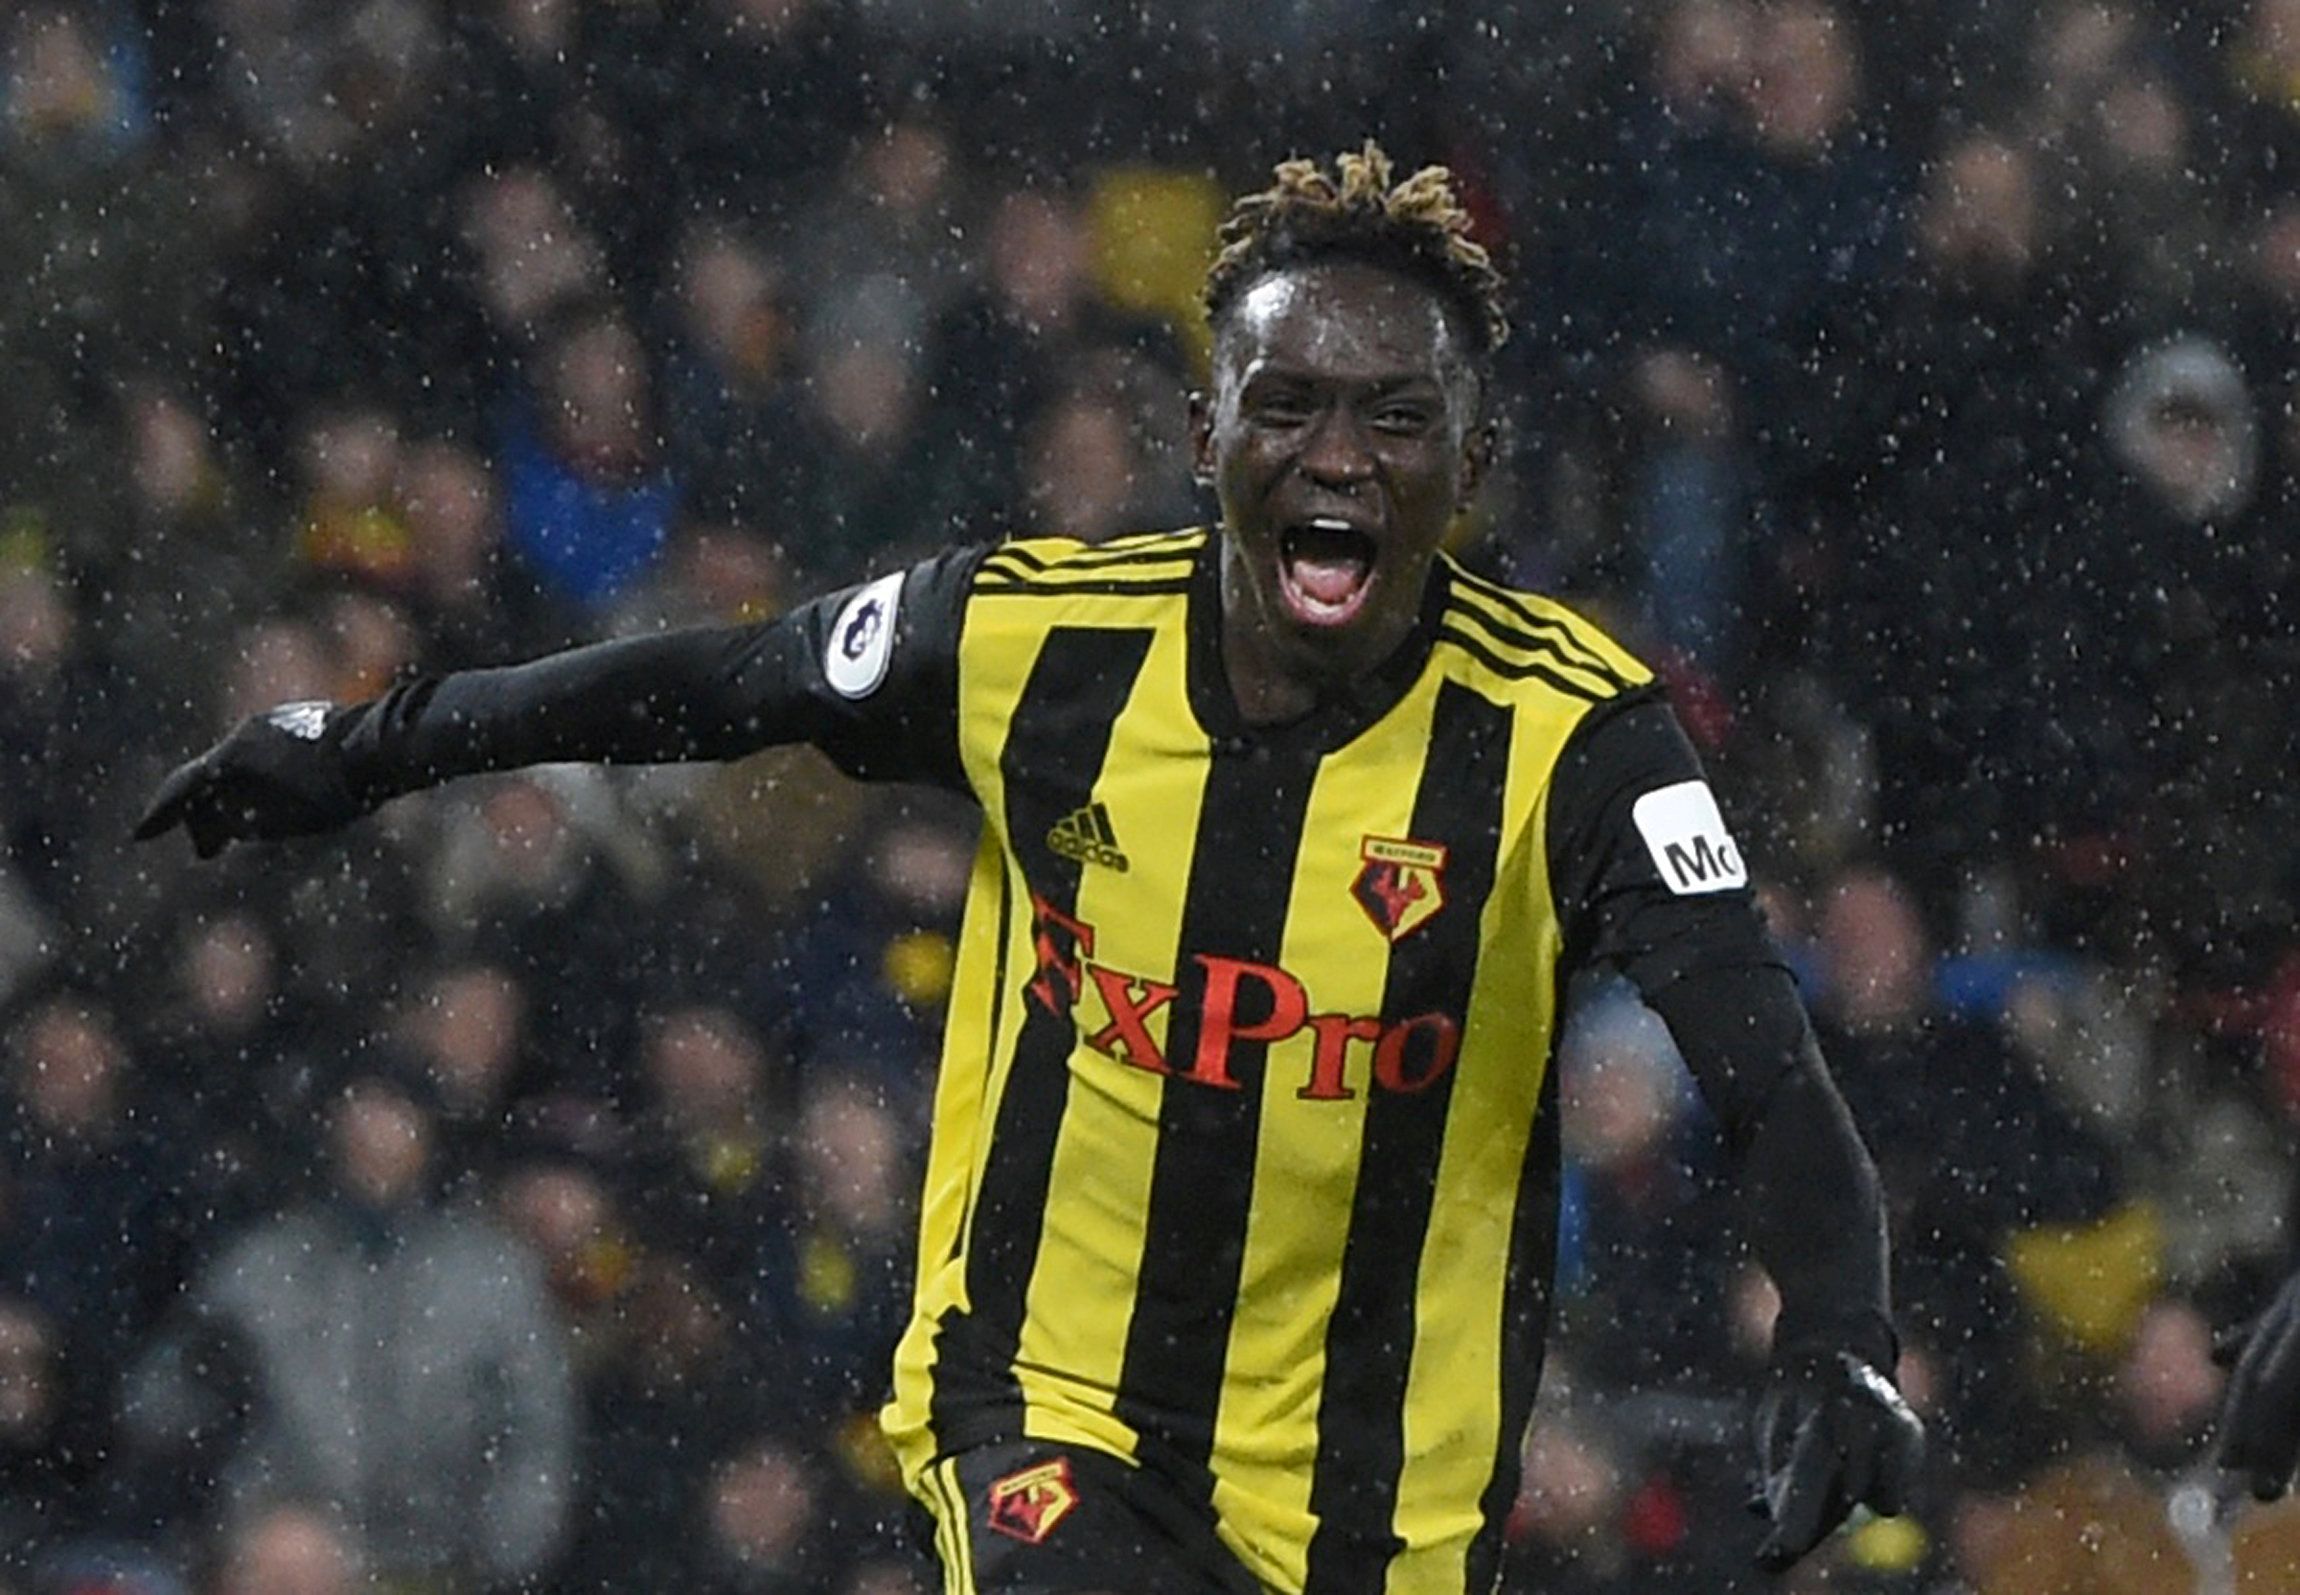 Soccer Football - Premier League - Watford v Cardiff City - Vicarage Road, Watford, Britain - December 15, 2018  Watford's Domingos Quina celebrates scoring their third goal     Action Images via Reuters/Alan Walter  EDITORIAL USE ONLY. No use with unauthorized audio, video, data, fixture lists, club/league logos or 